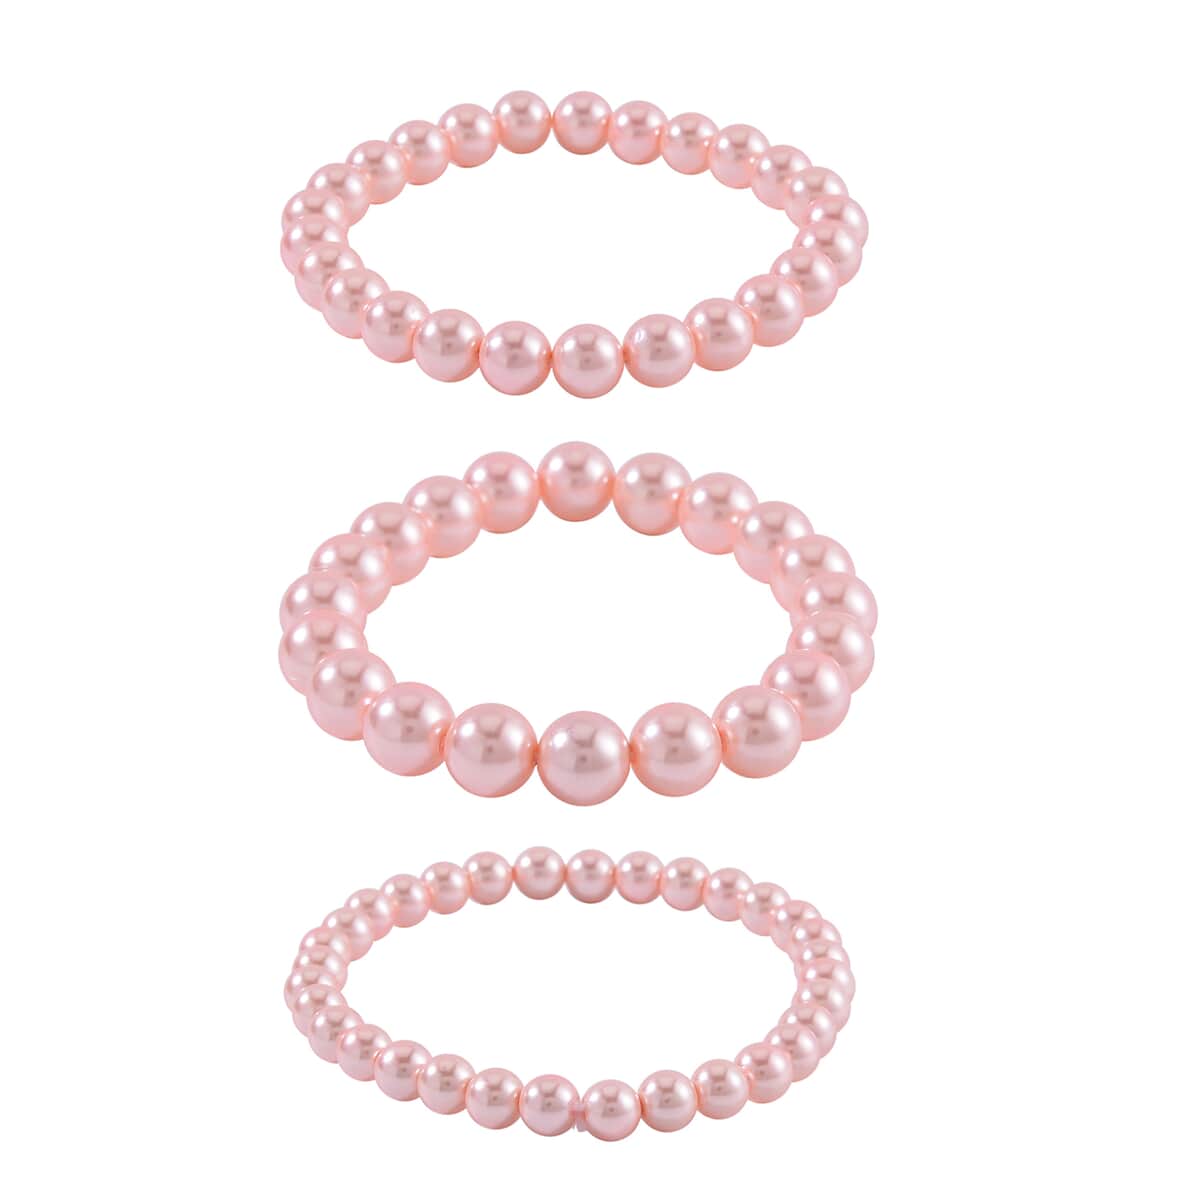 Set with Bow Ribbon Ivory Packaging 9pcs Set Peach Color Constituted Shell Pearl Stretch Bracelet, Earrings and Necklace 20-22 Inches in Stainless Steel image number 8